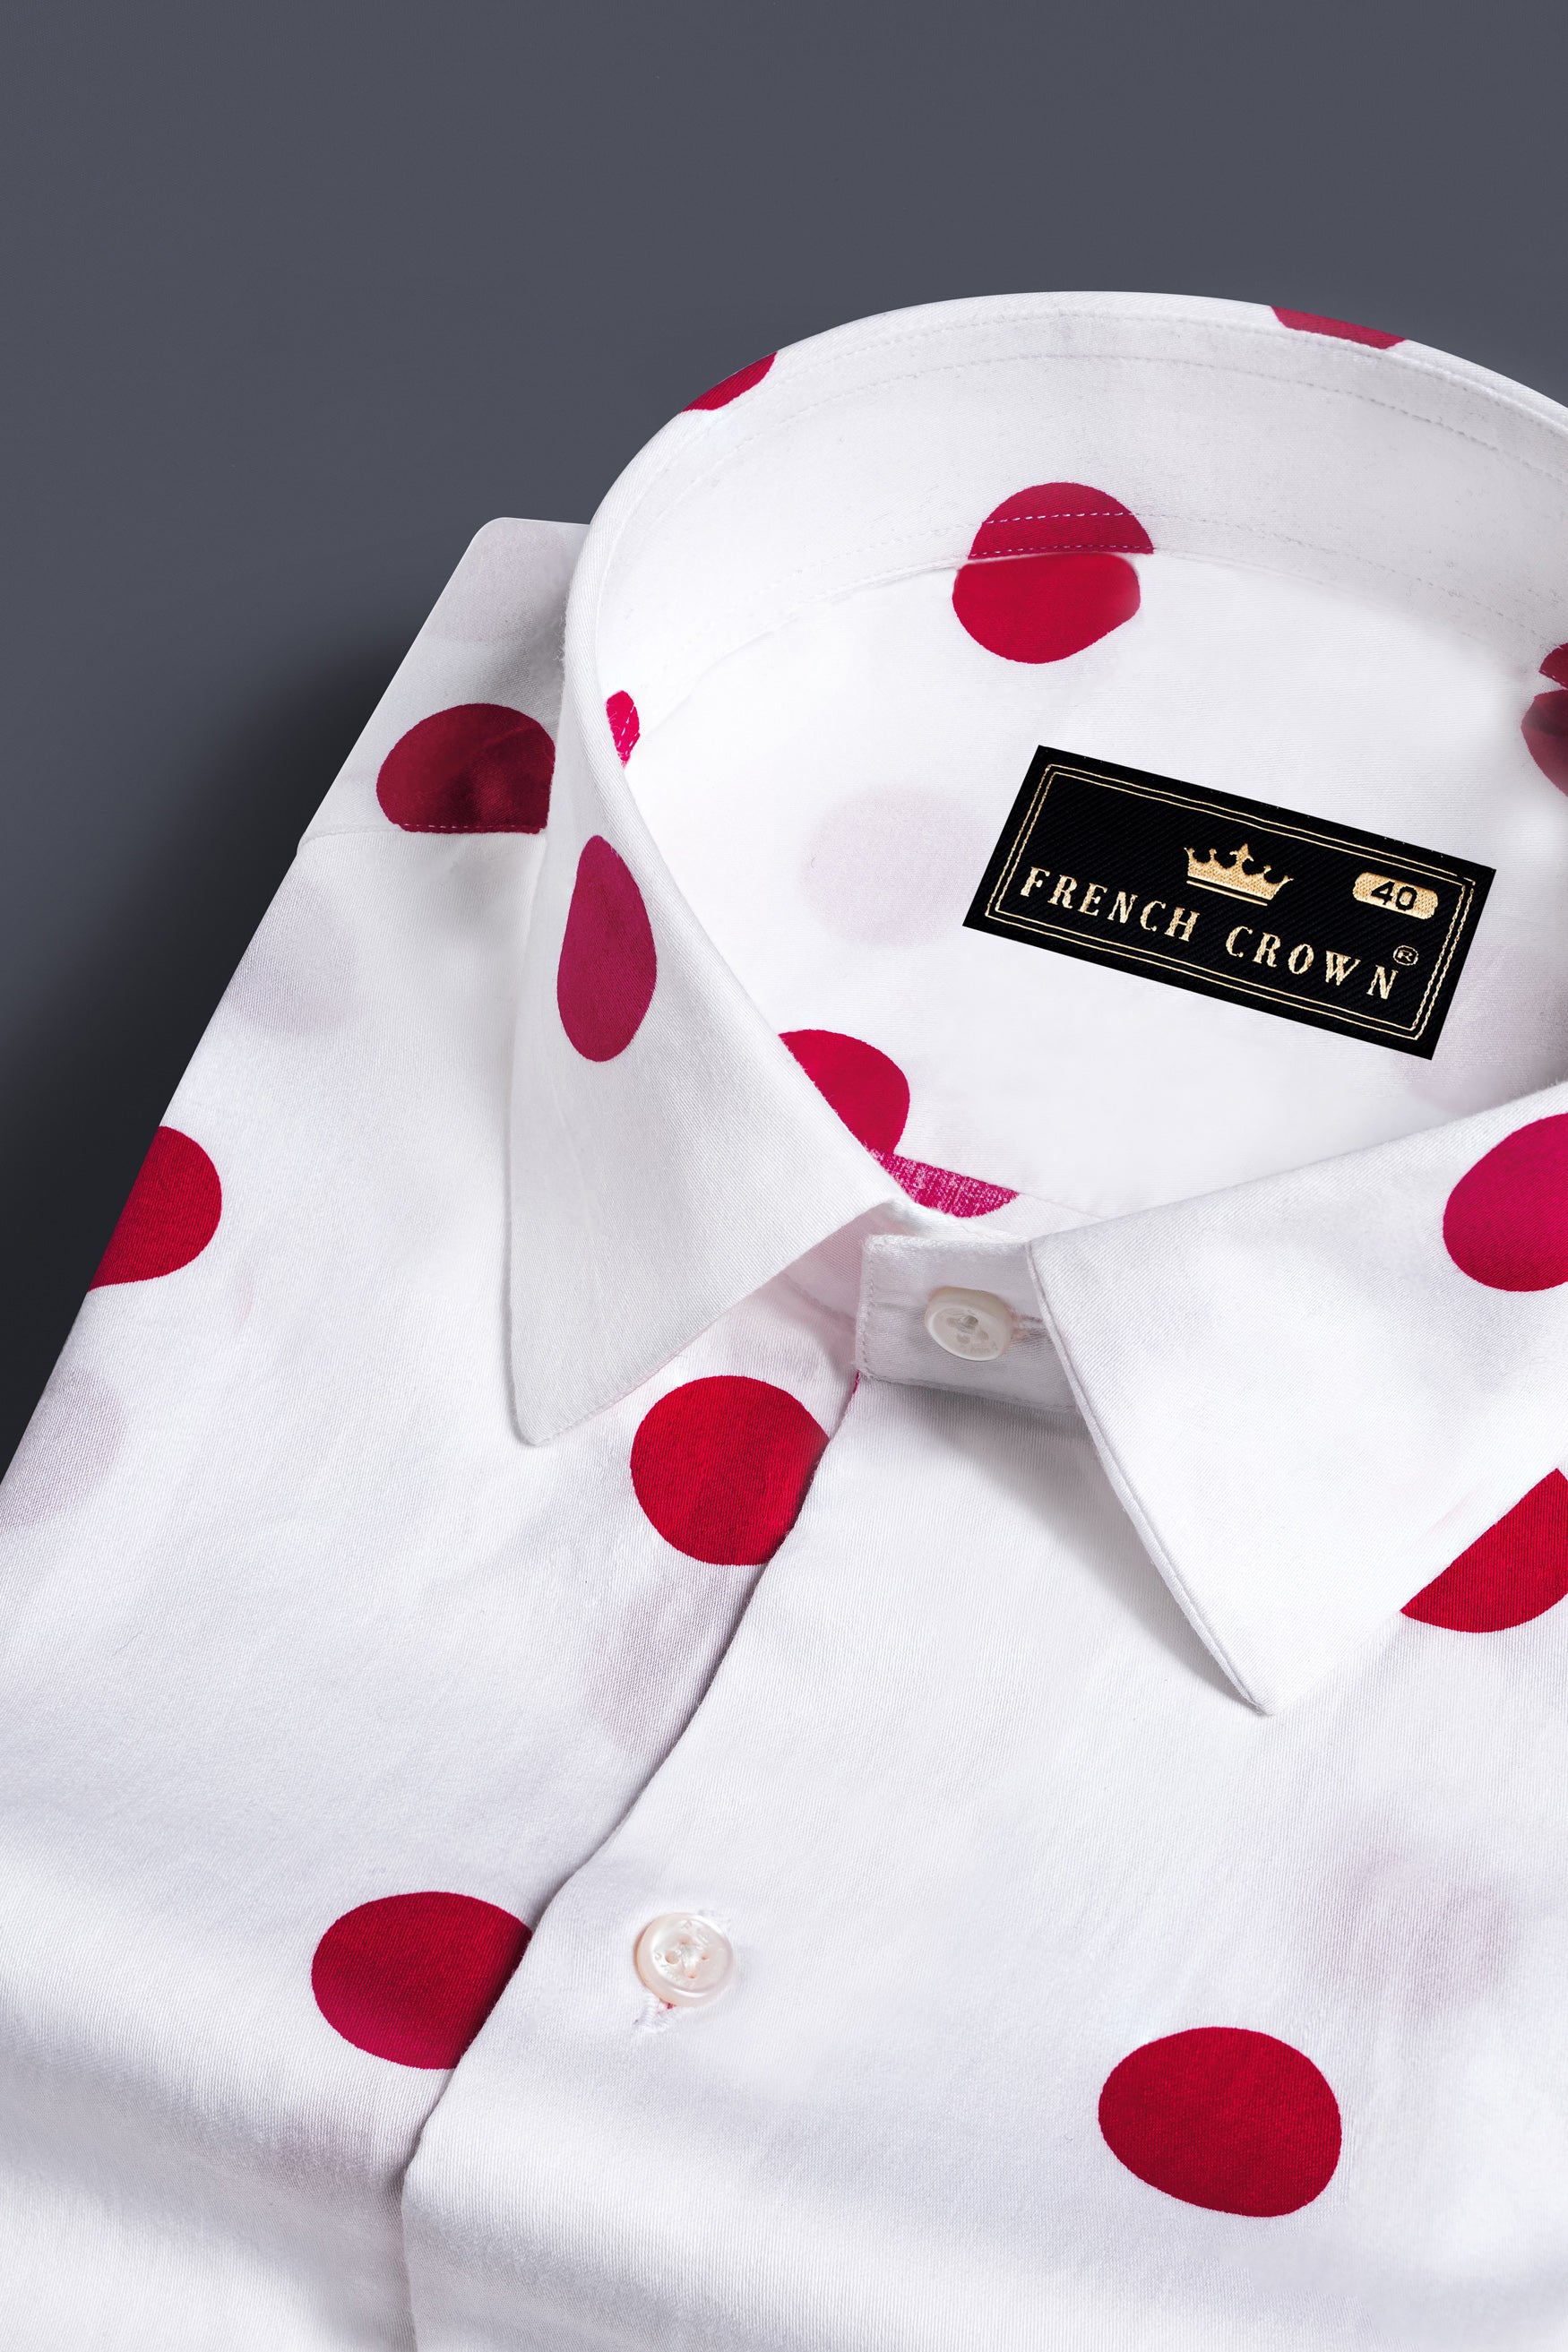 Bright White and Cardinal Red Polka Dotted Subtle Sheen Super Soft Premium Cotton Shirt